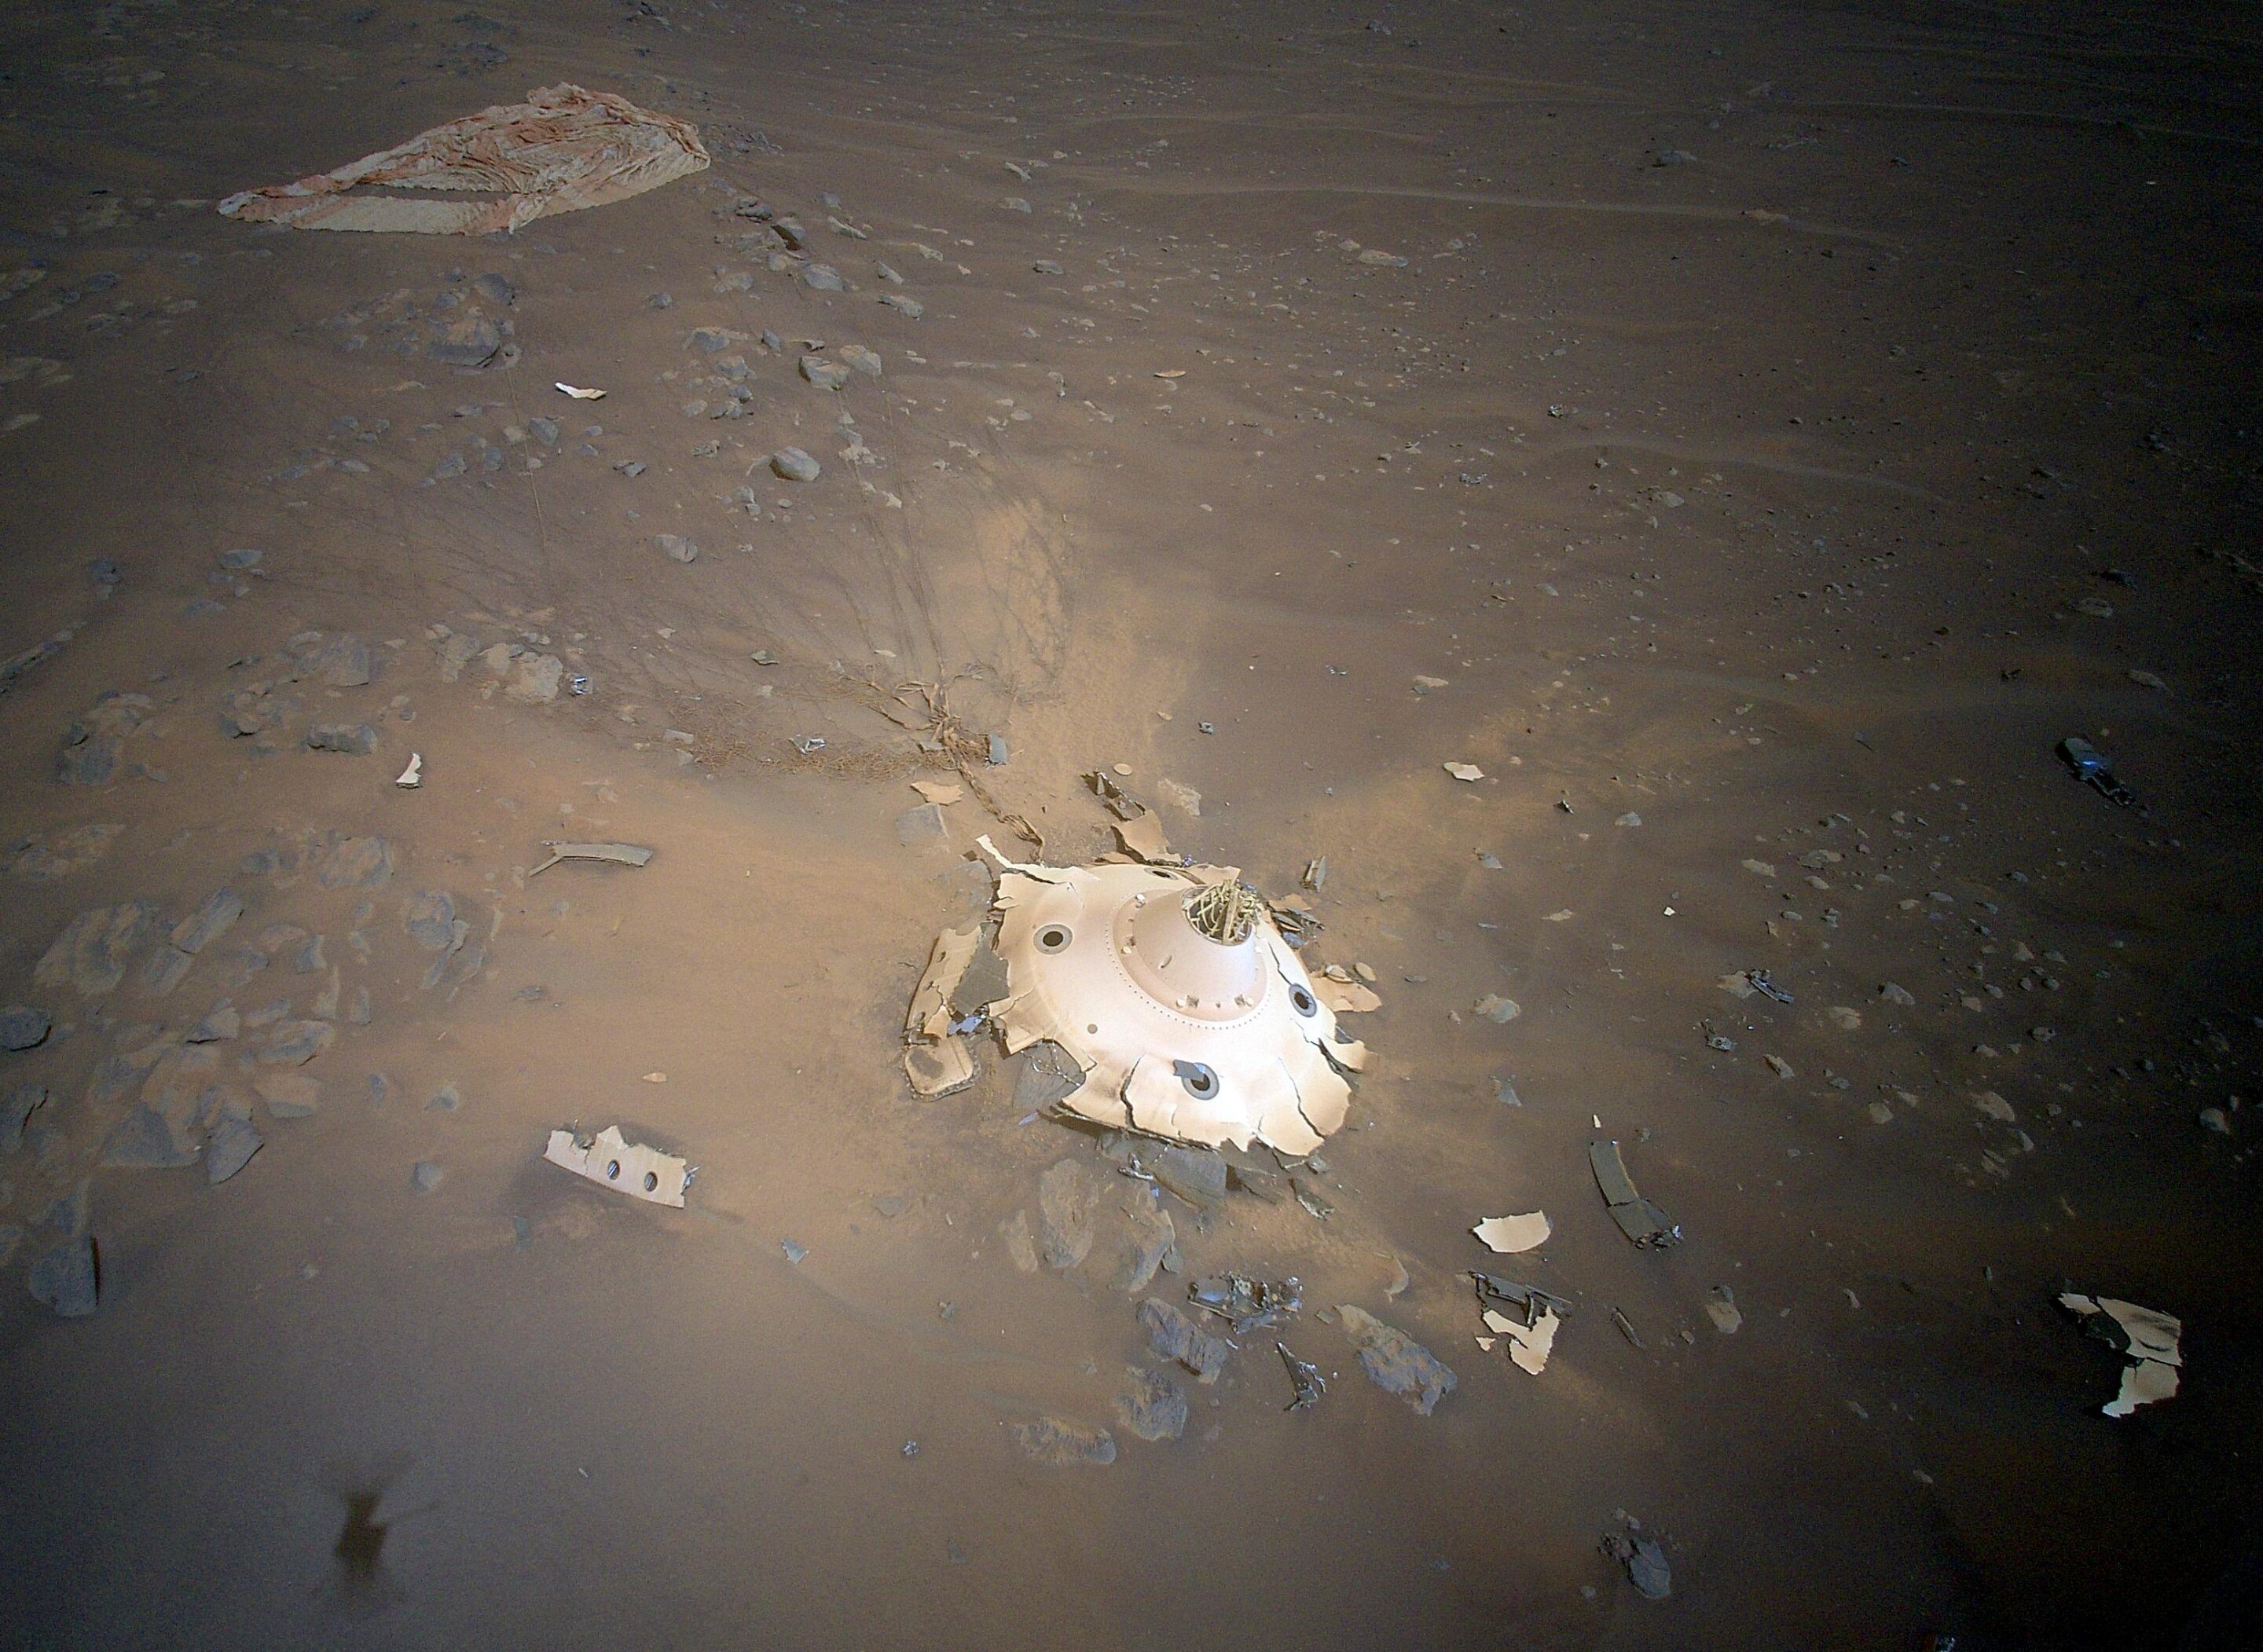 #Ingenuity Mars Helicopter spots gear that helped Perseverance rover land